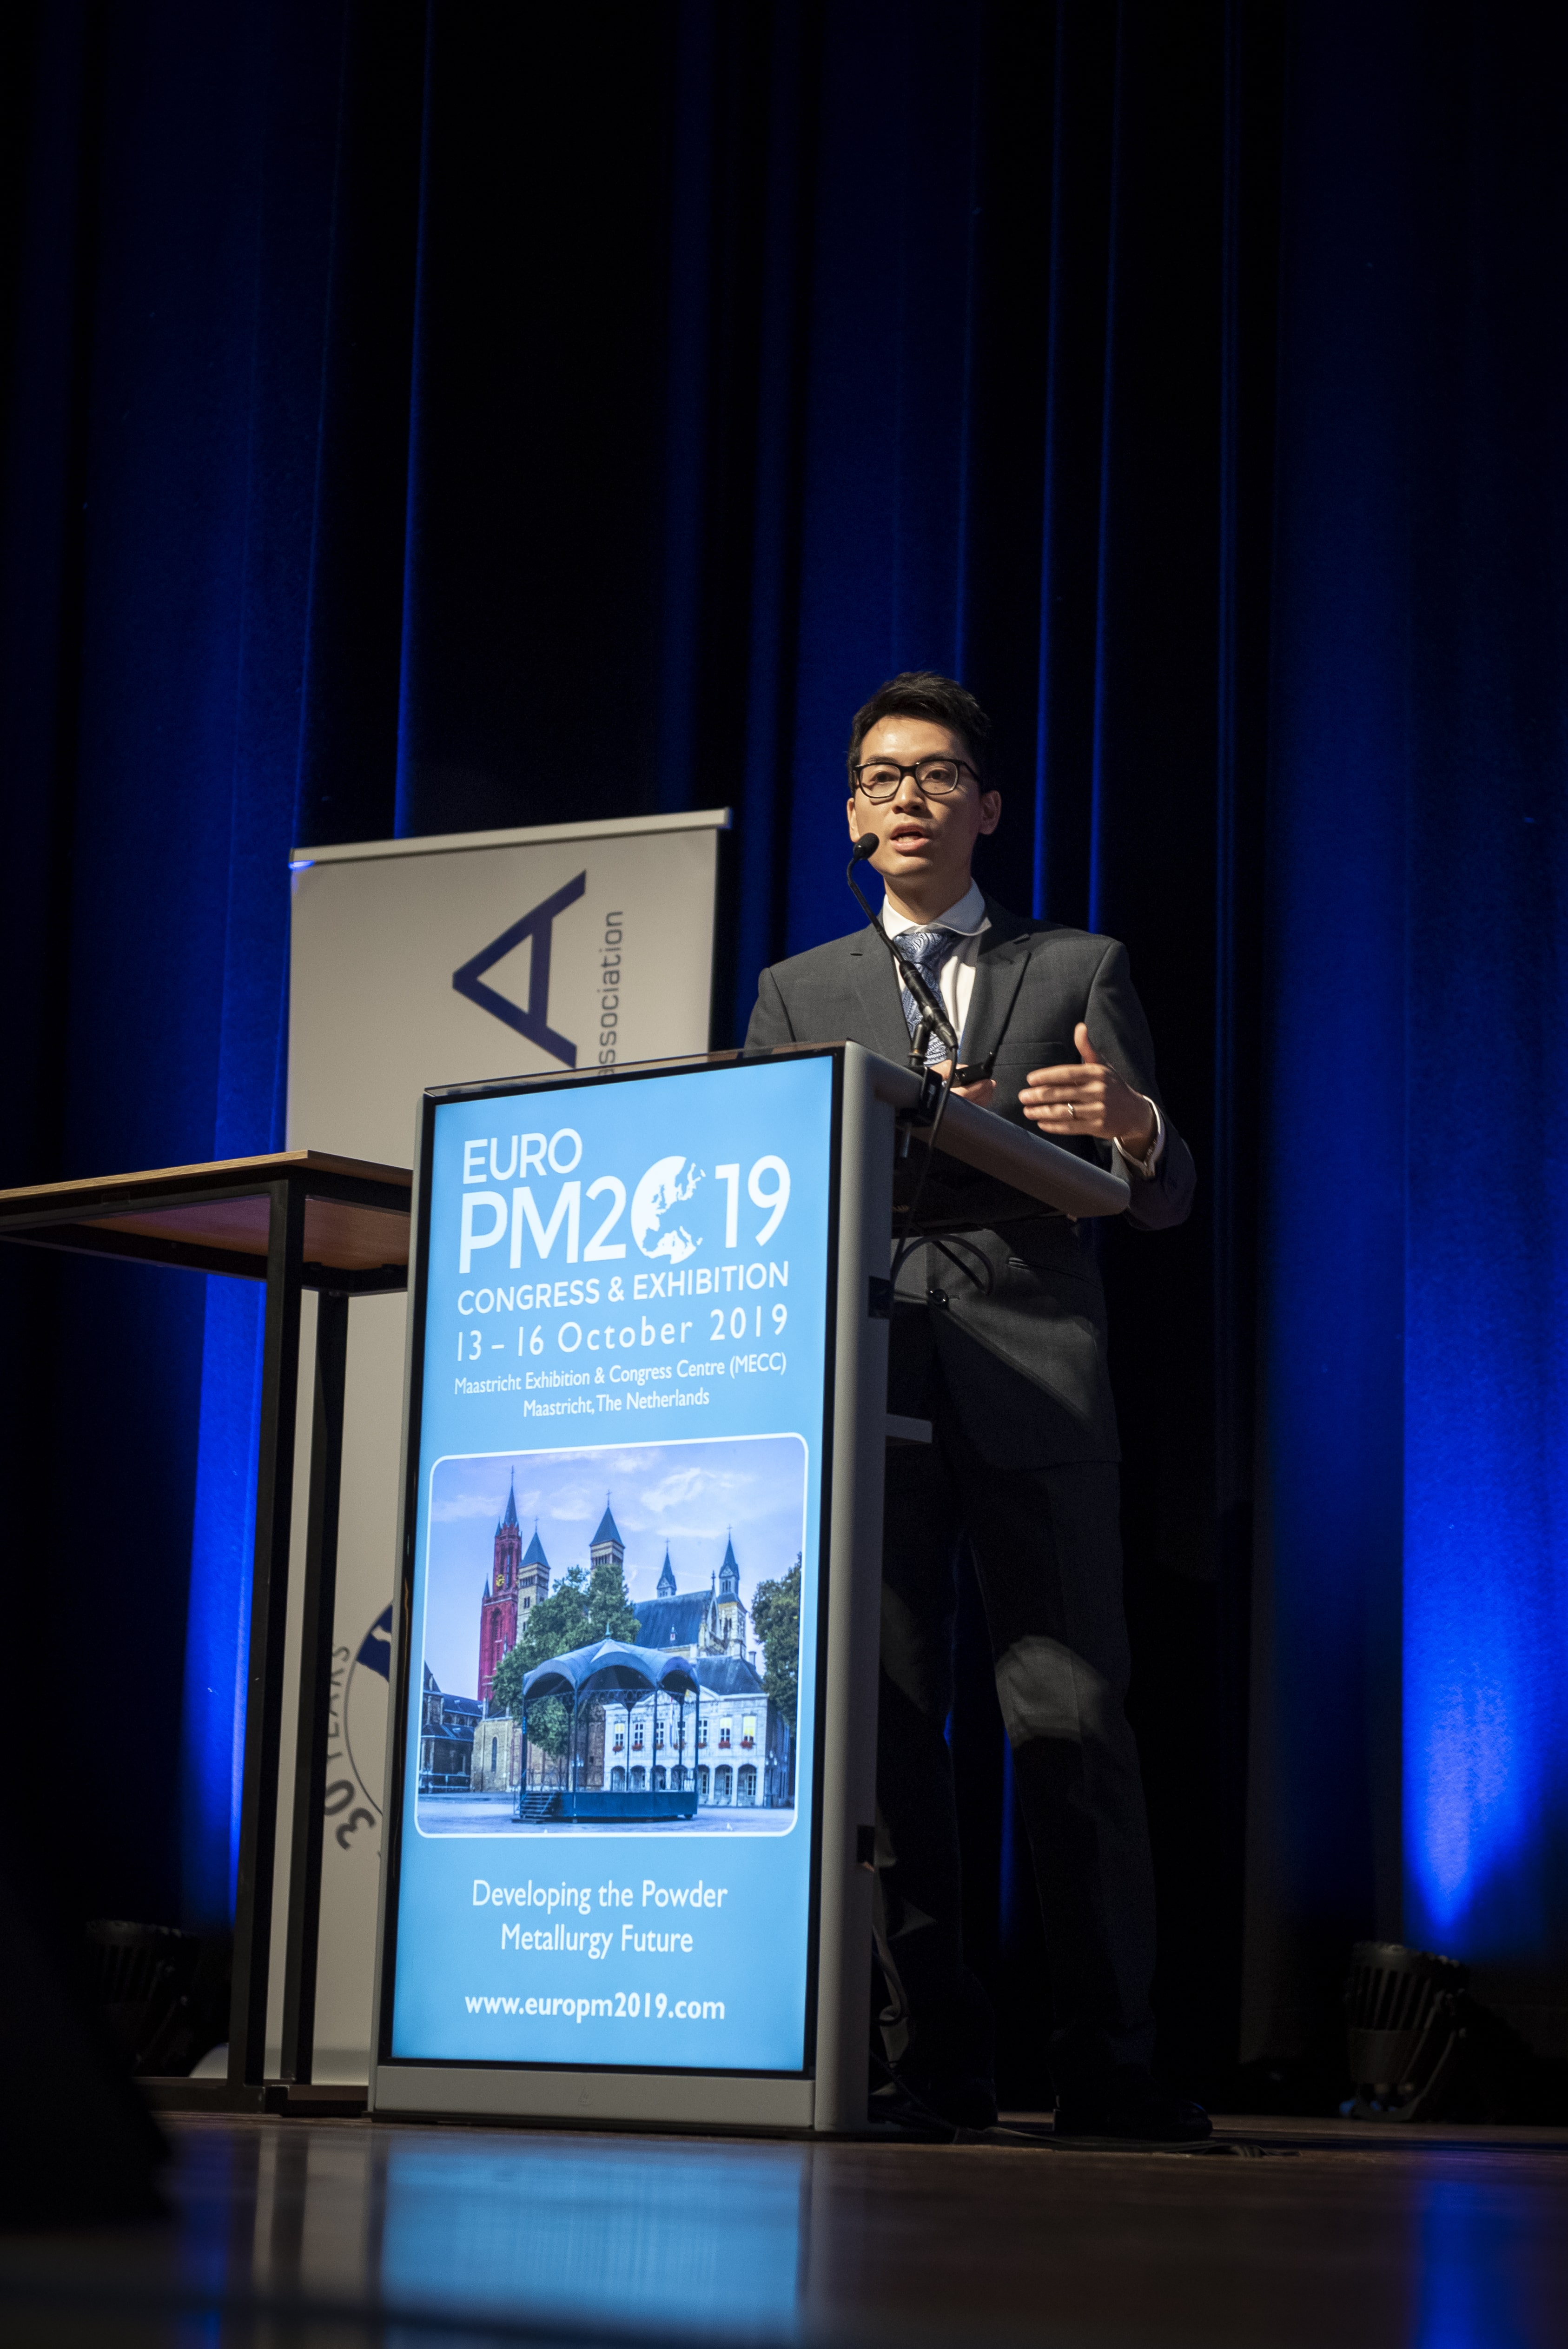 Image: EPMA European Powder Metallurgy Association Congress & Exhibition at the MECC in Maastricht, The Netherlands on Monday 14th October 2019. Copyright of Andrew McLeish.